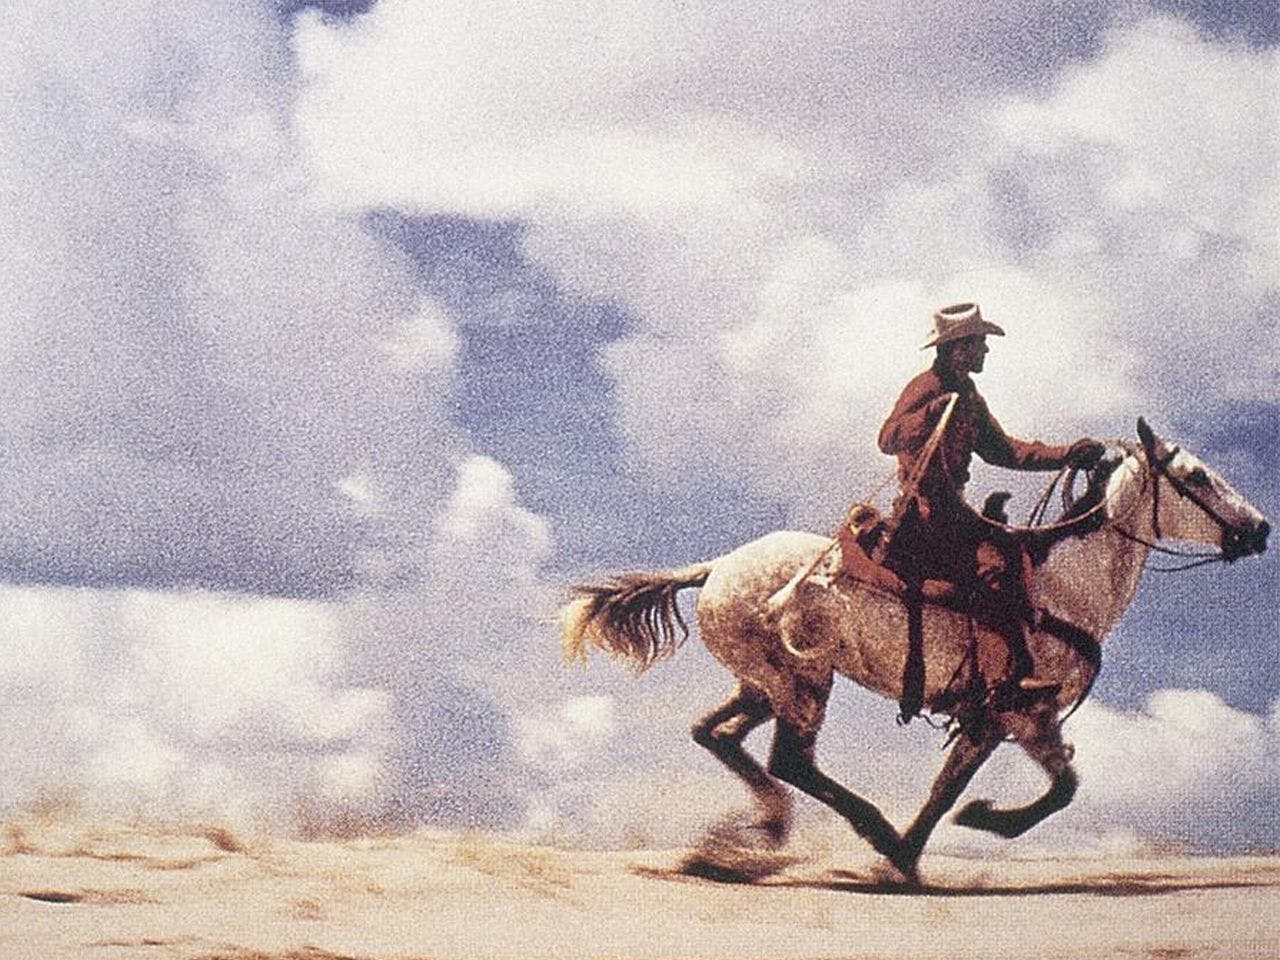 An artwork by Richard Prince, called Untitled (cowboy), dated 1989